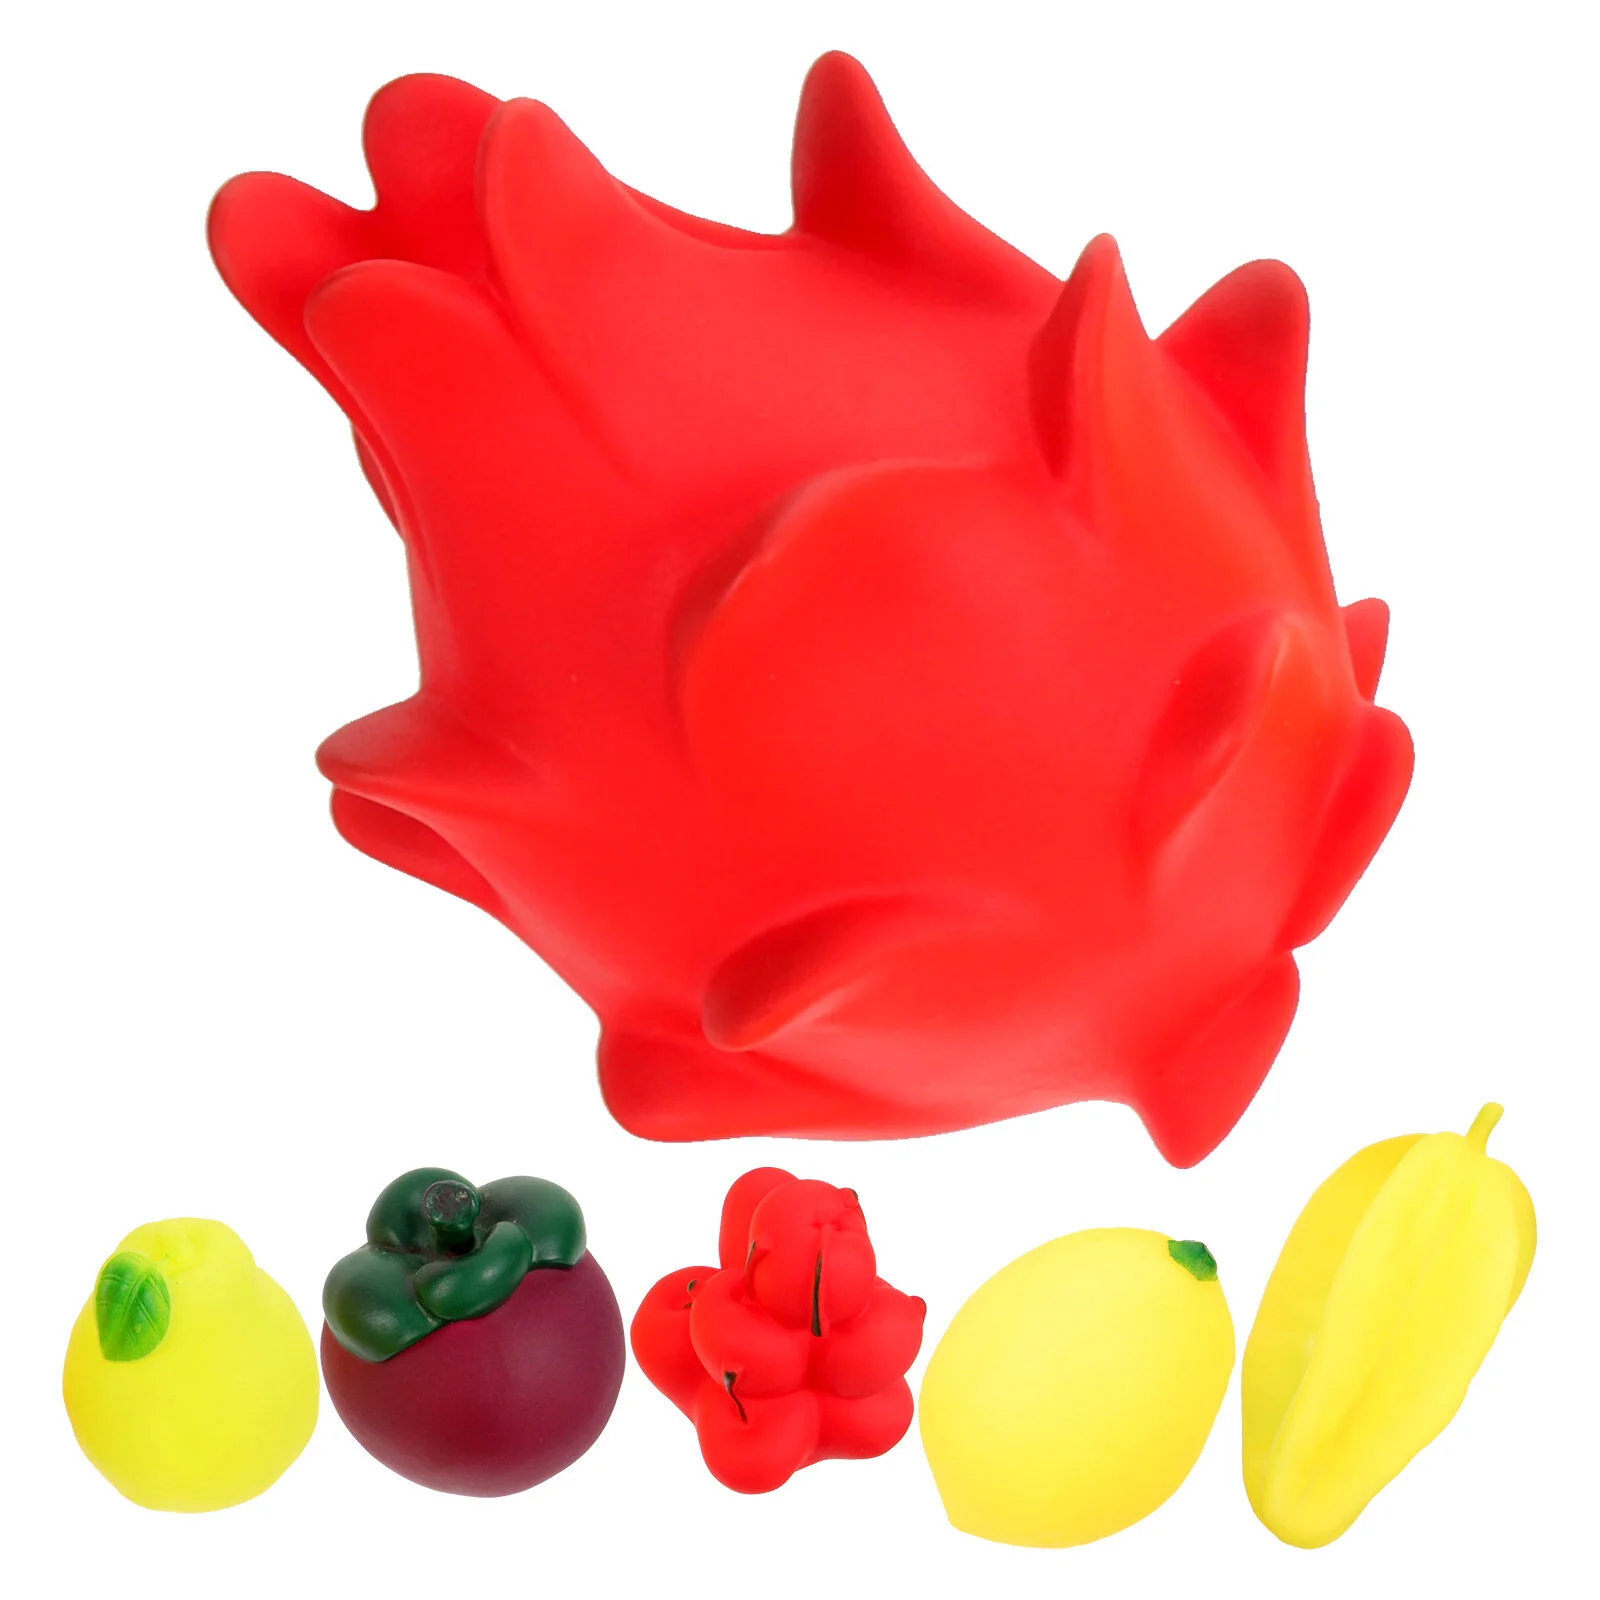 

6 Pcs Pressure Relief Party Tricky Stretchy Banana Favor Pet Squeezing Squeeze Sensory Fruit